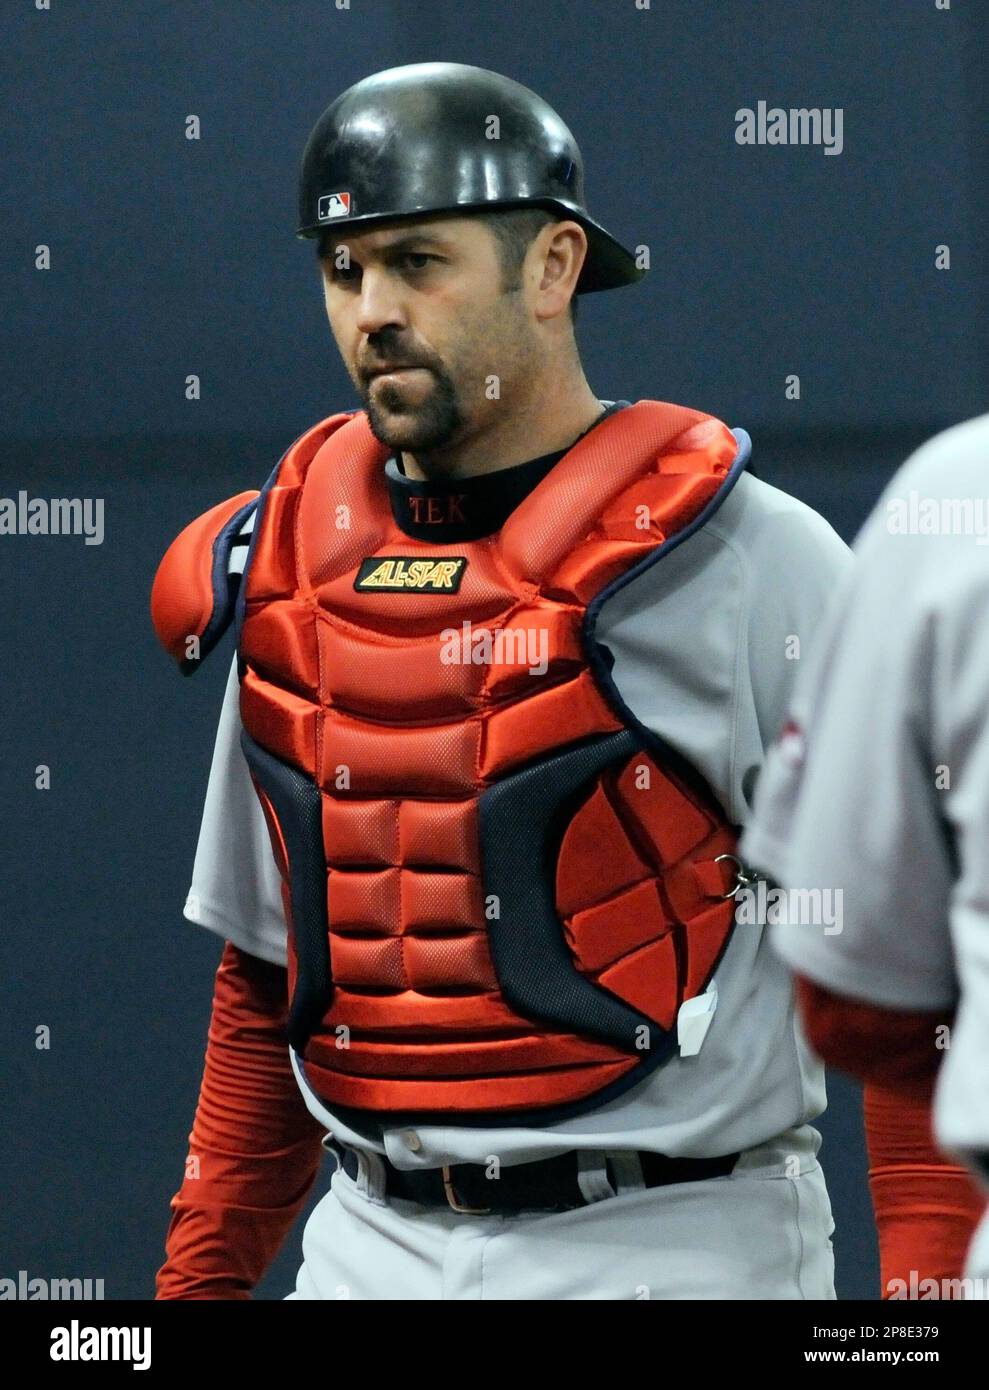 Jason Varitek is still finding ways for the Red Sox to win - The Boston  Globe